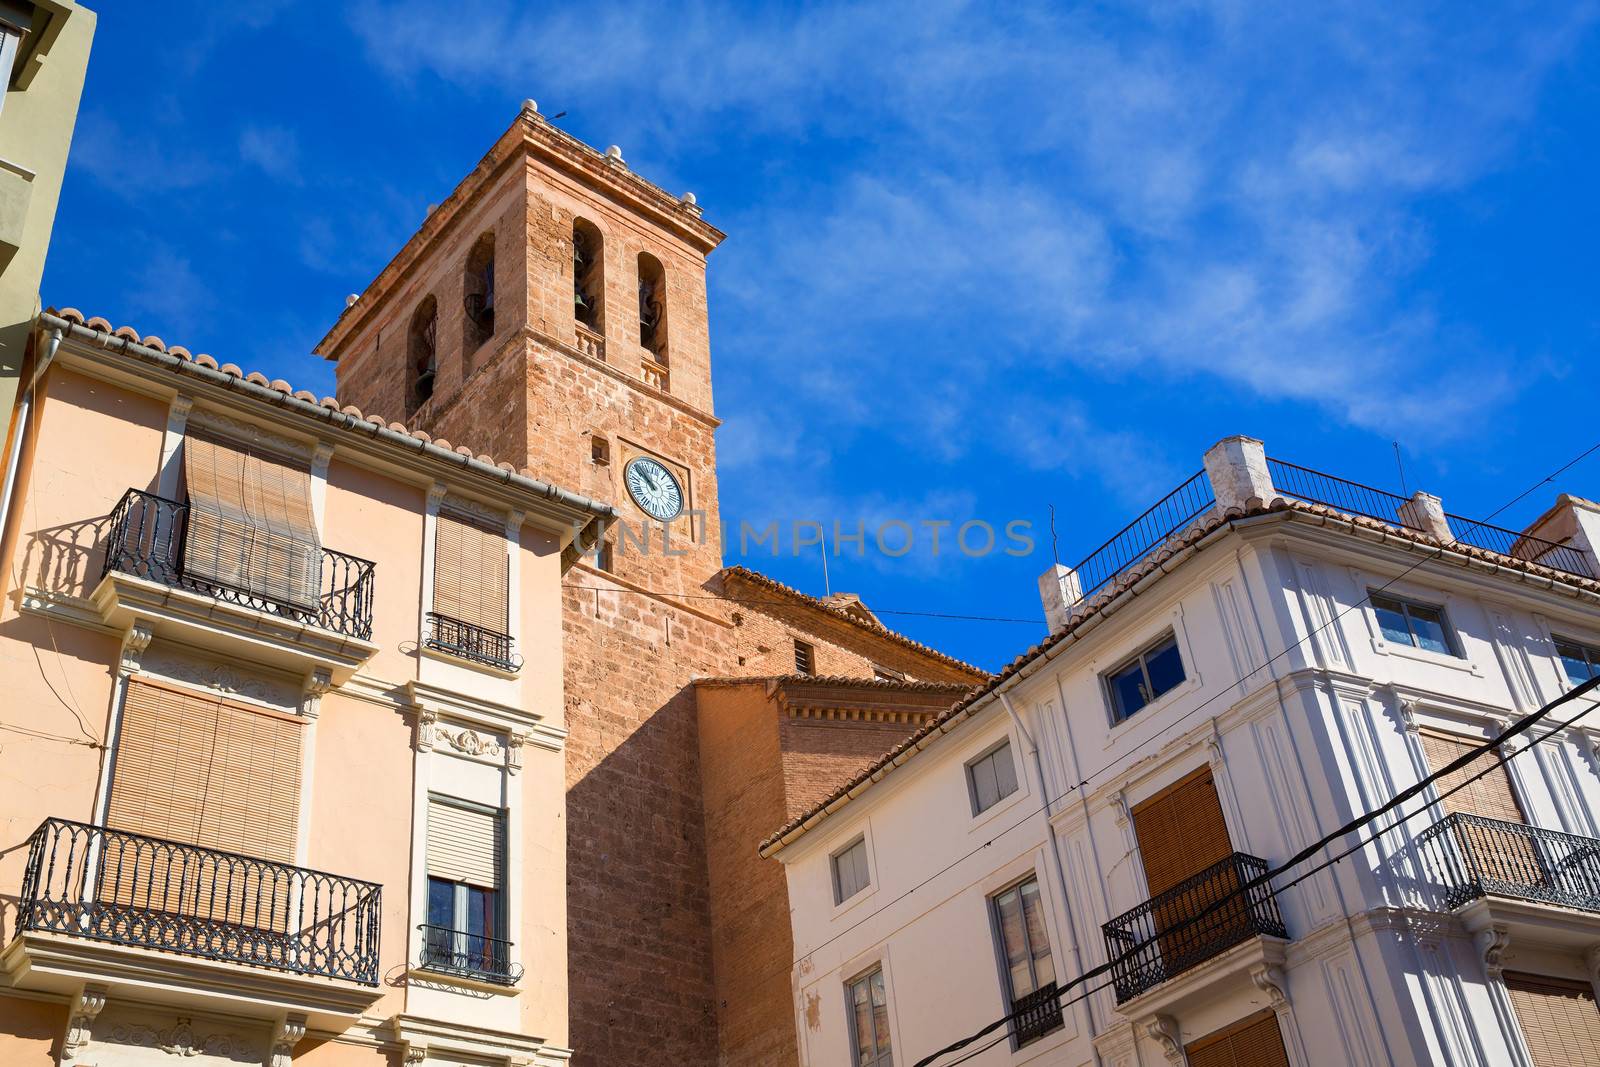 Segorbe Cathedral tower Castellon in Spain by lunamarina